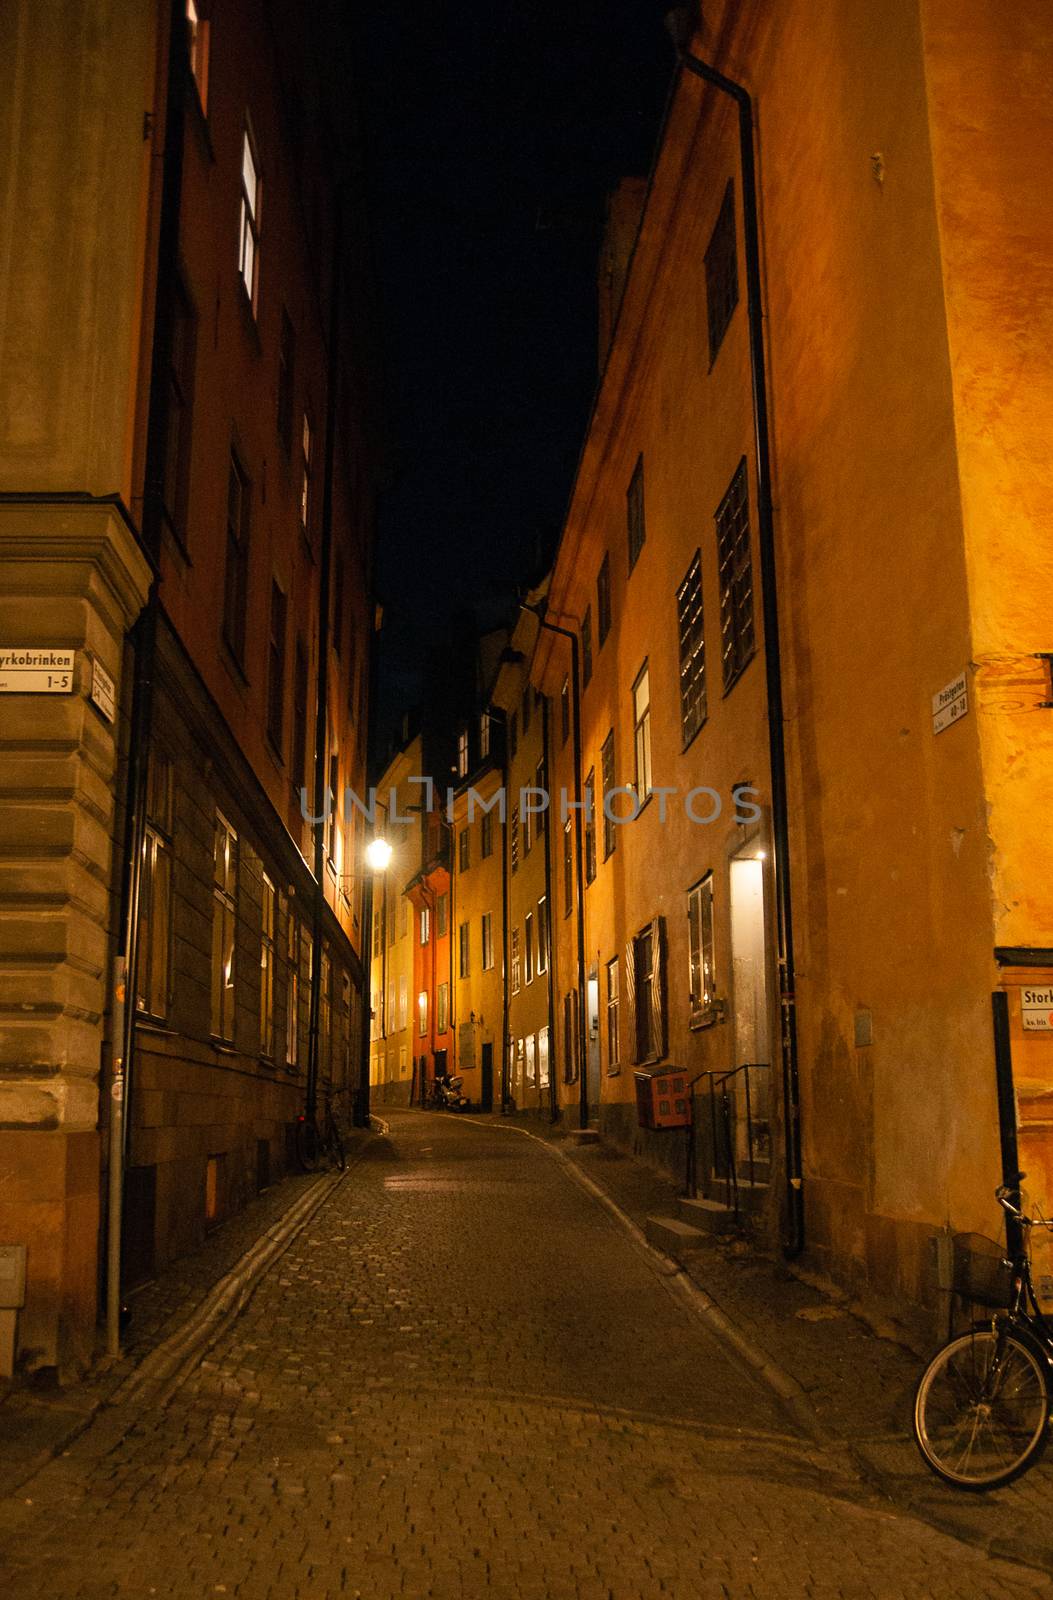 Stockholm old city at night by javax